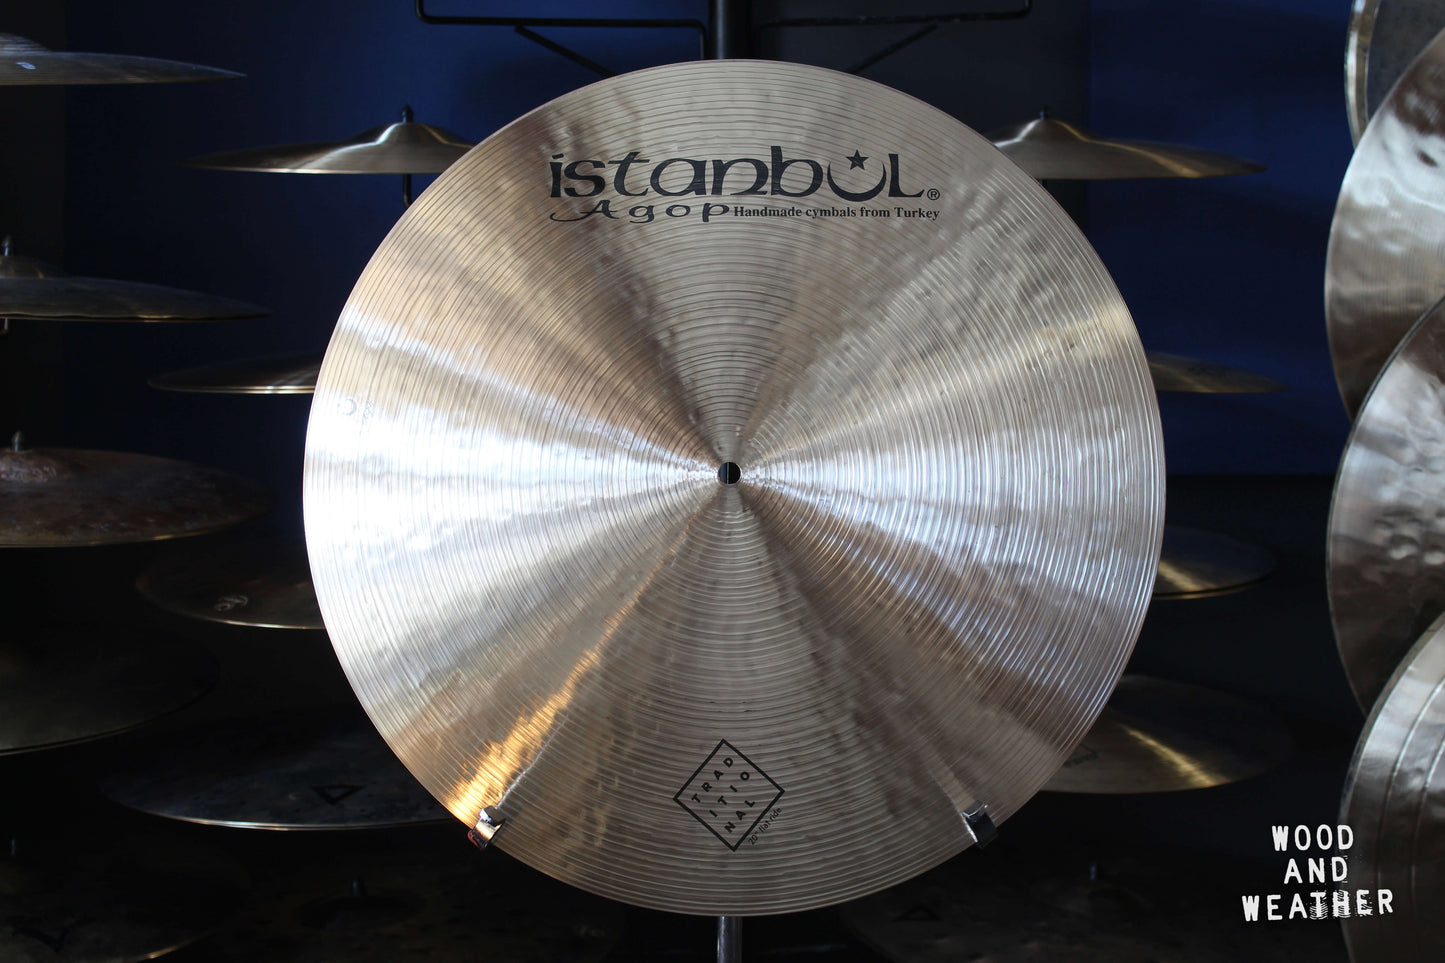 Istanbul Agop 20" Traditional Flat Ride Cymbal 1815g